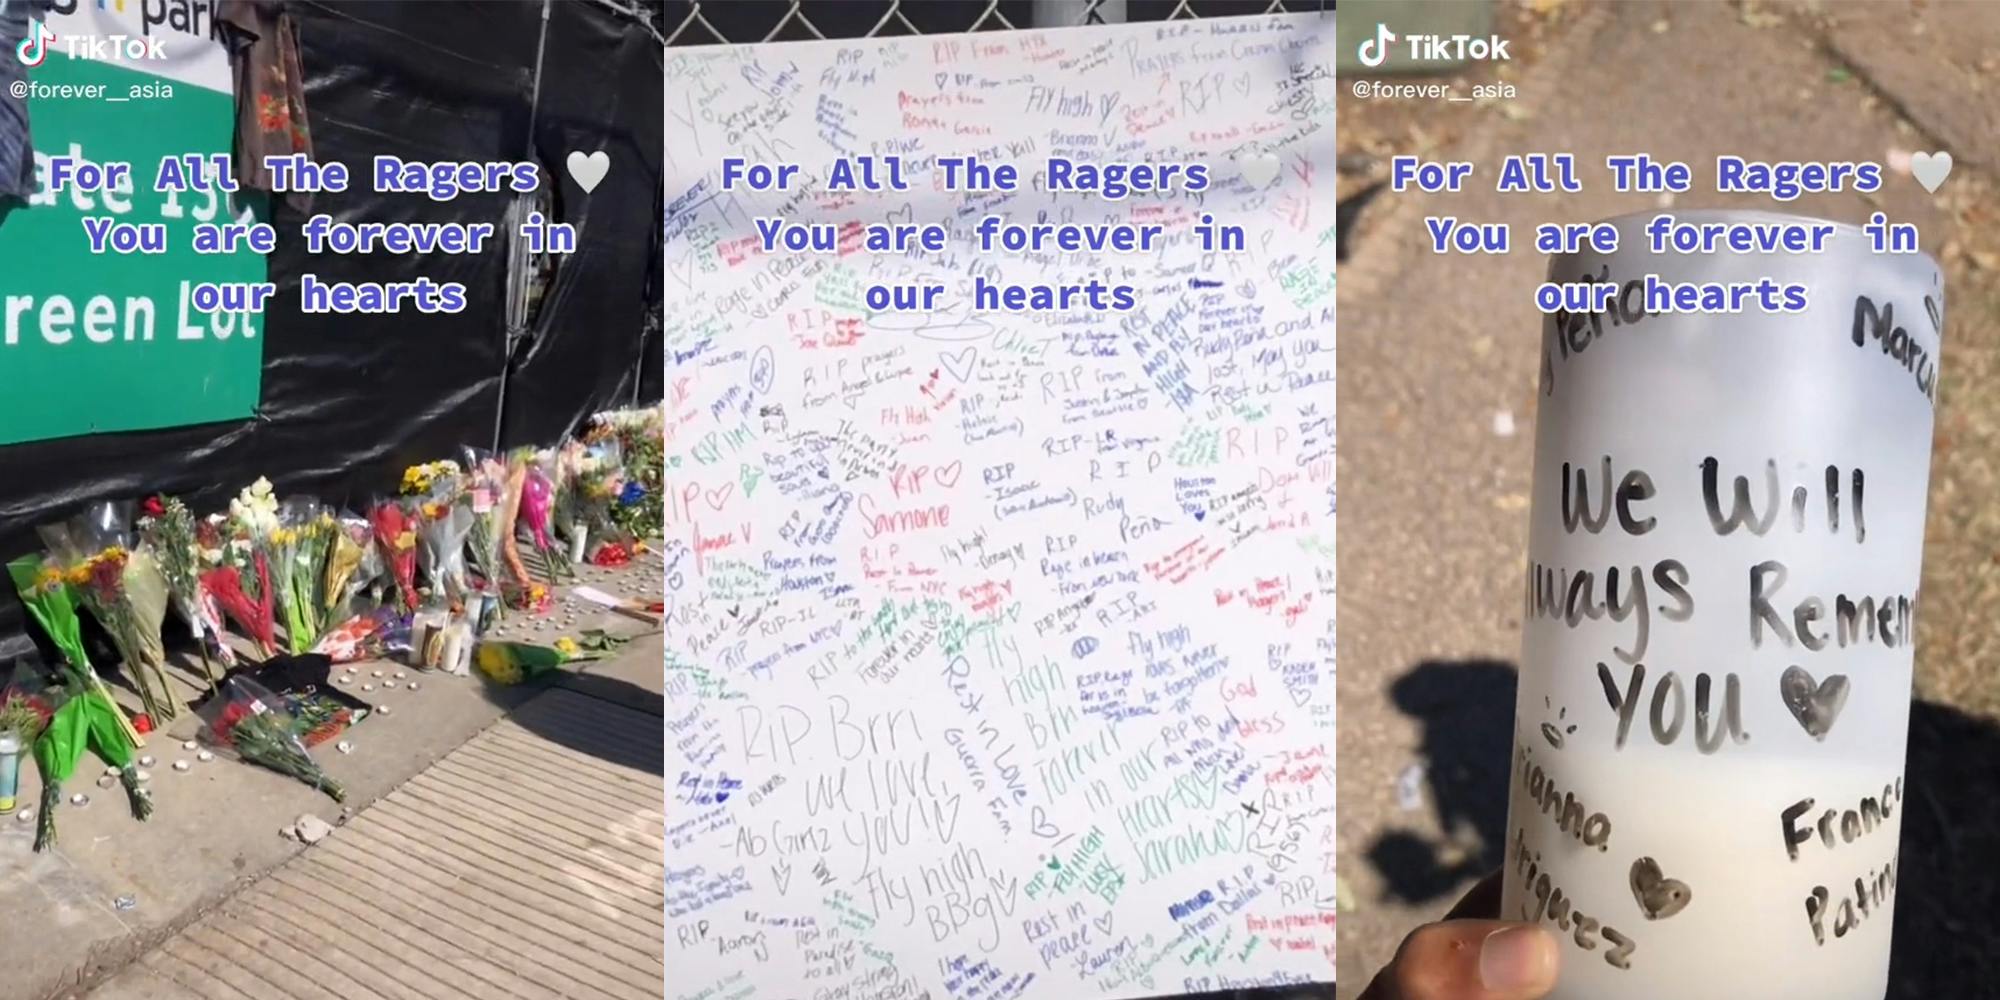 astroworld memorial (l) poster with names (c) candle with "We will always remember you" written on it with names (r) all with caption "For All The Ragers You are forever in our hearts"